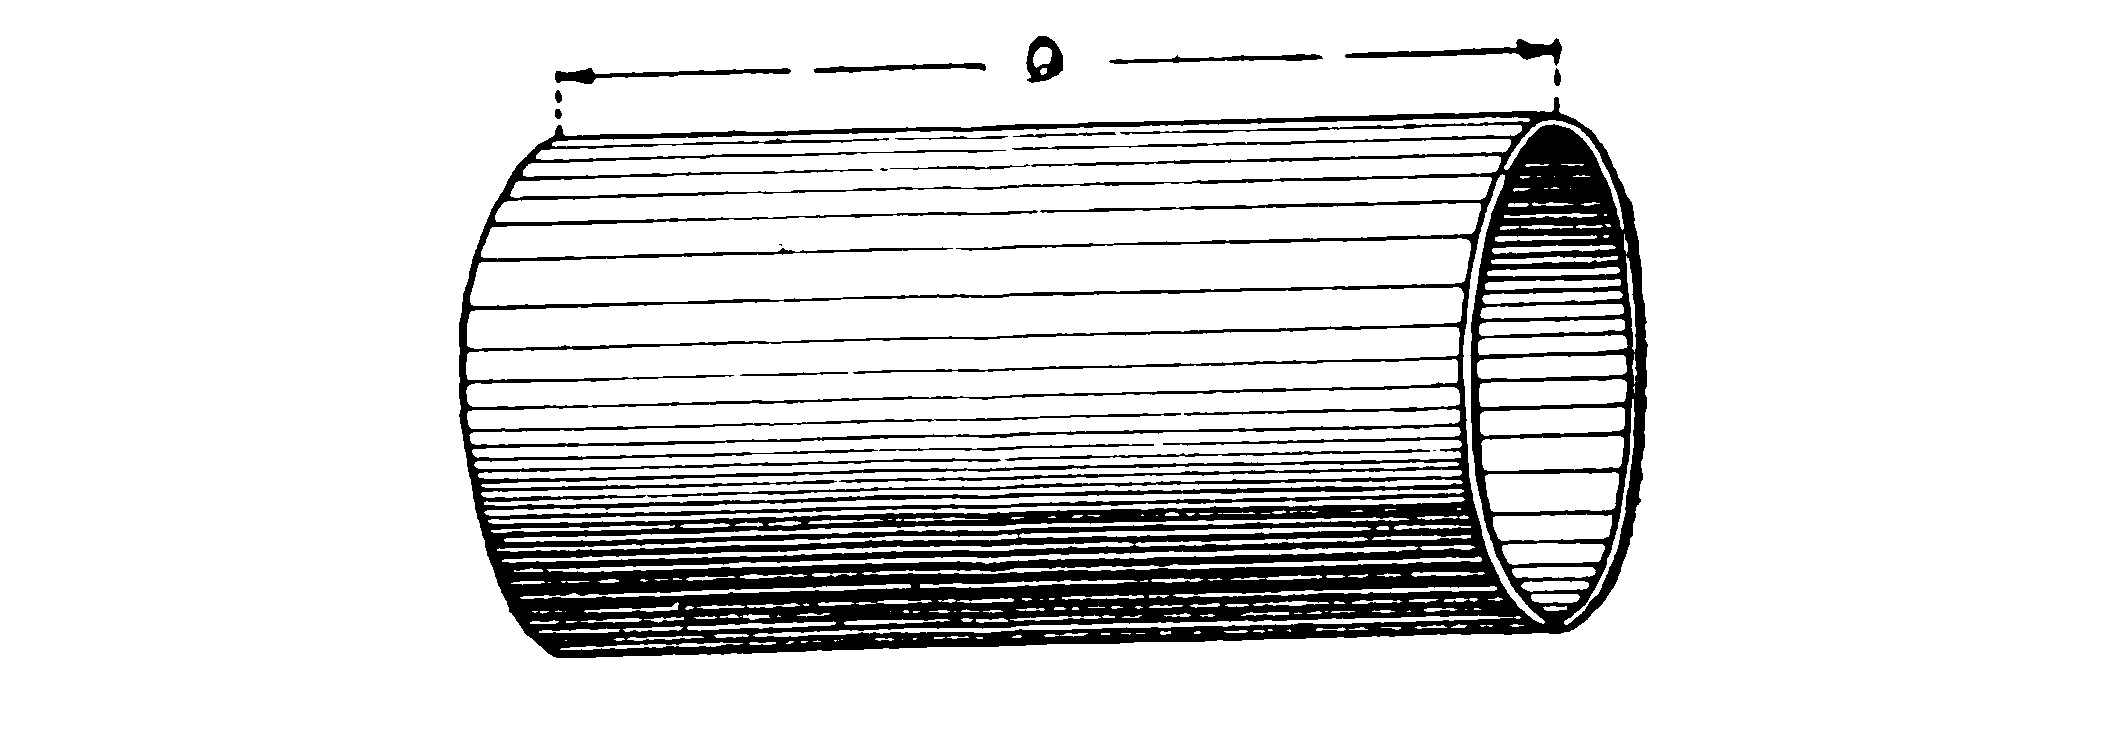 FIG. 116.—The tube.